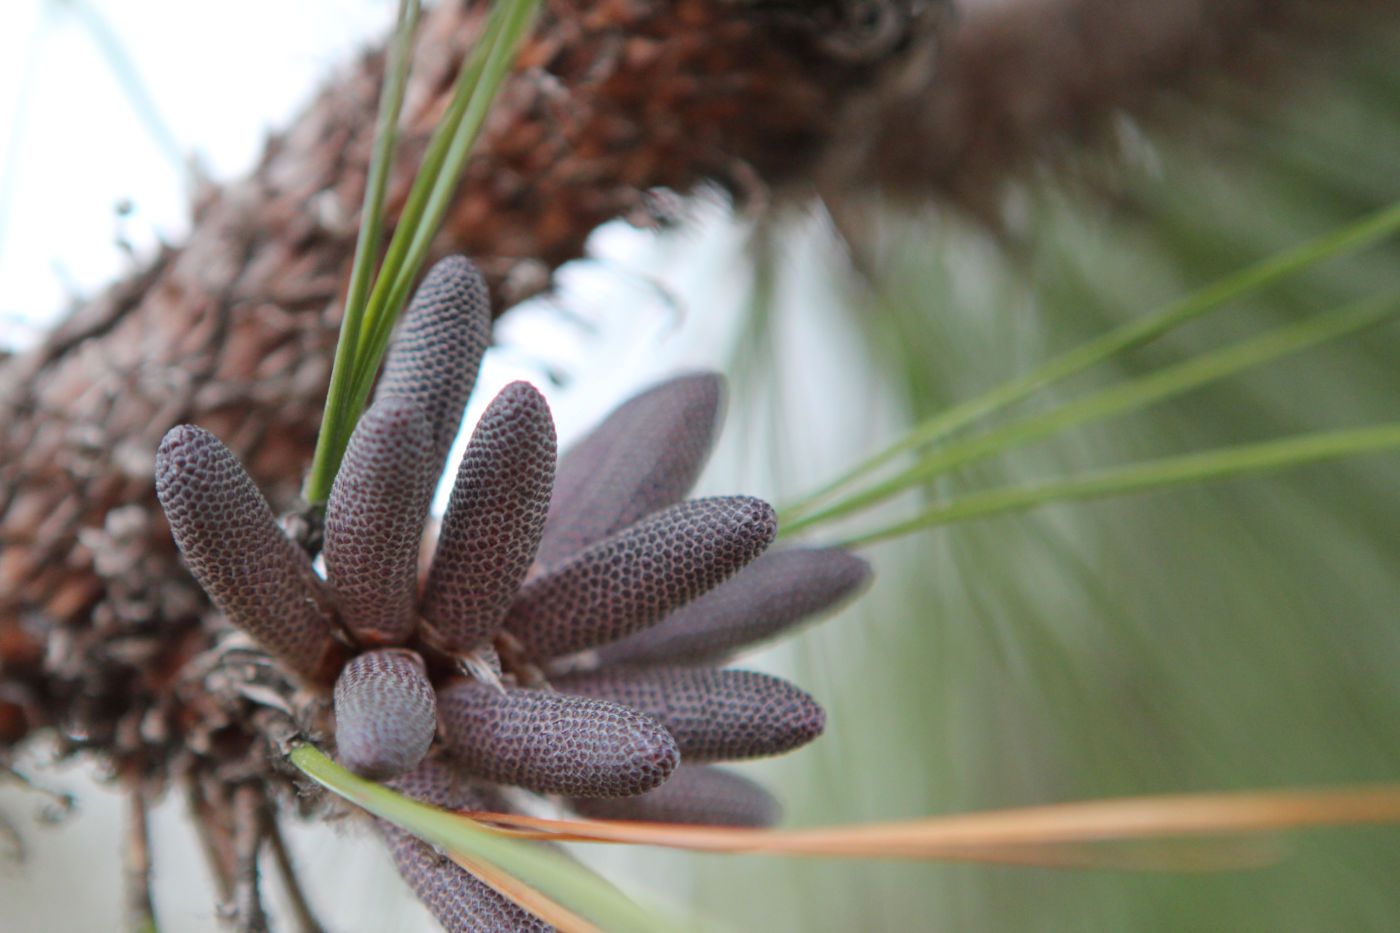 The male reproductive parts of longleaf pine